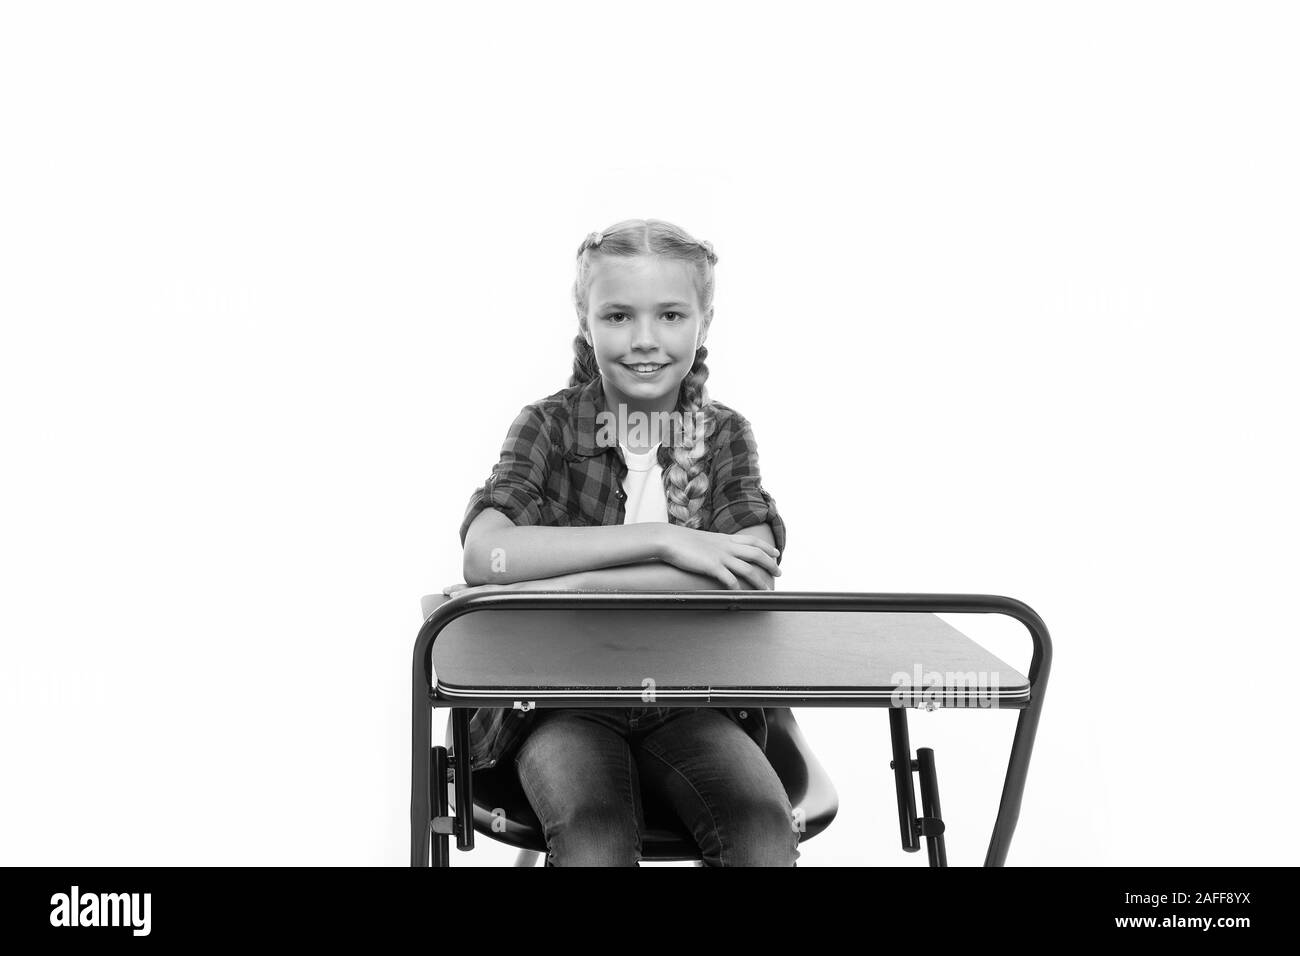 Back to school. Cute school child sitting at desk isolated on white. Little schoolgirl having lesson in primary school. Adorable small girl enjoying her school time. Stock Photo